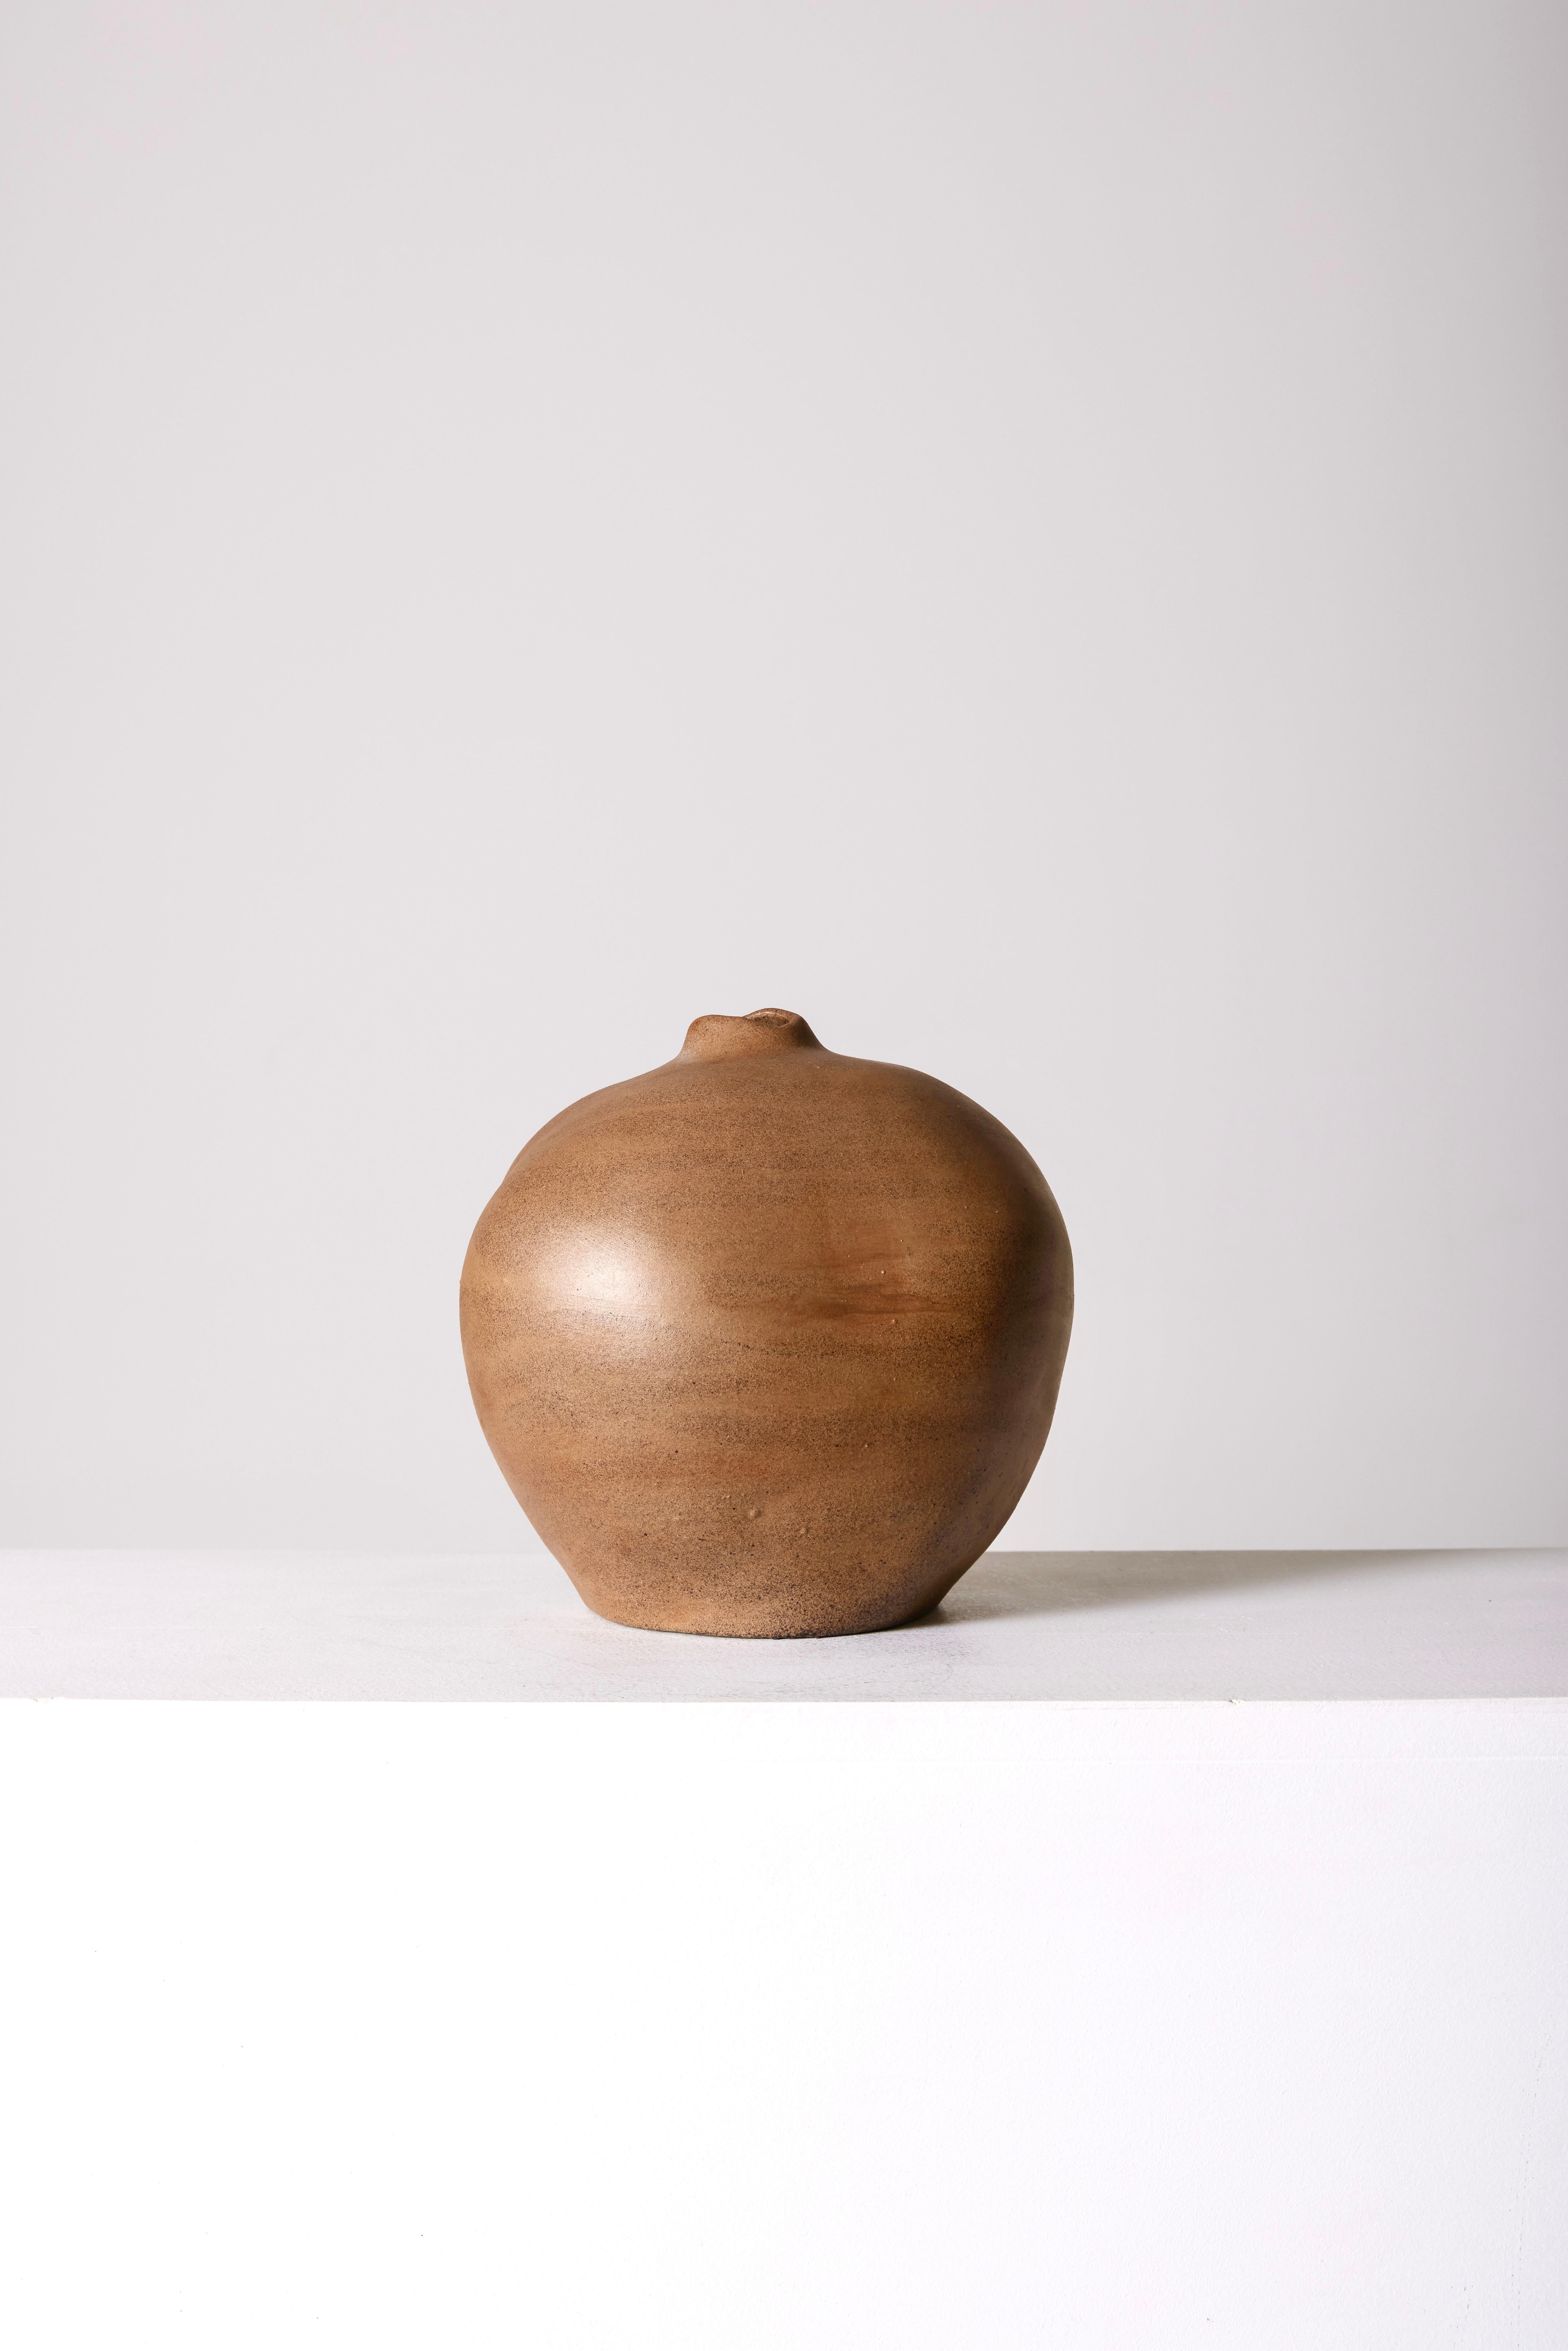 Sandstone ball vase, french craftsmanship in very good condition.
LP1108